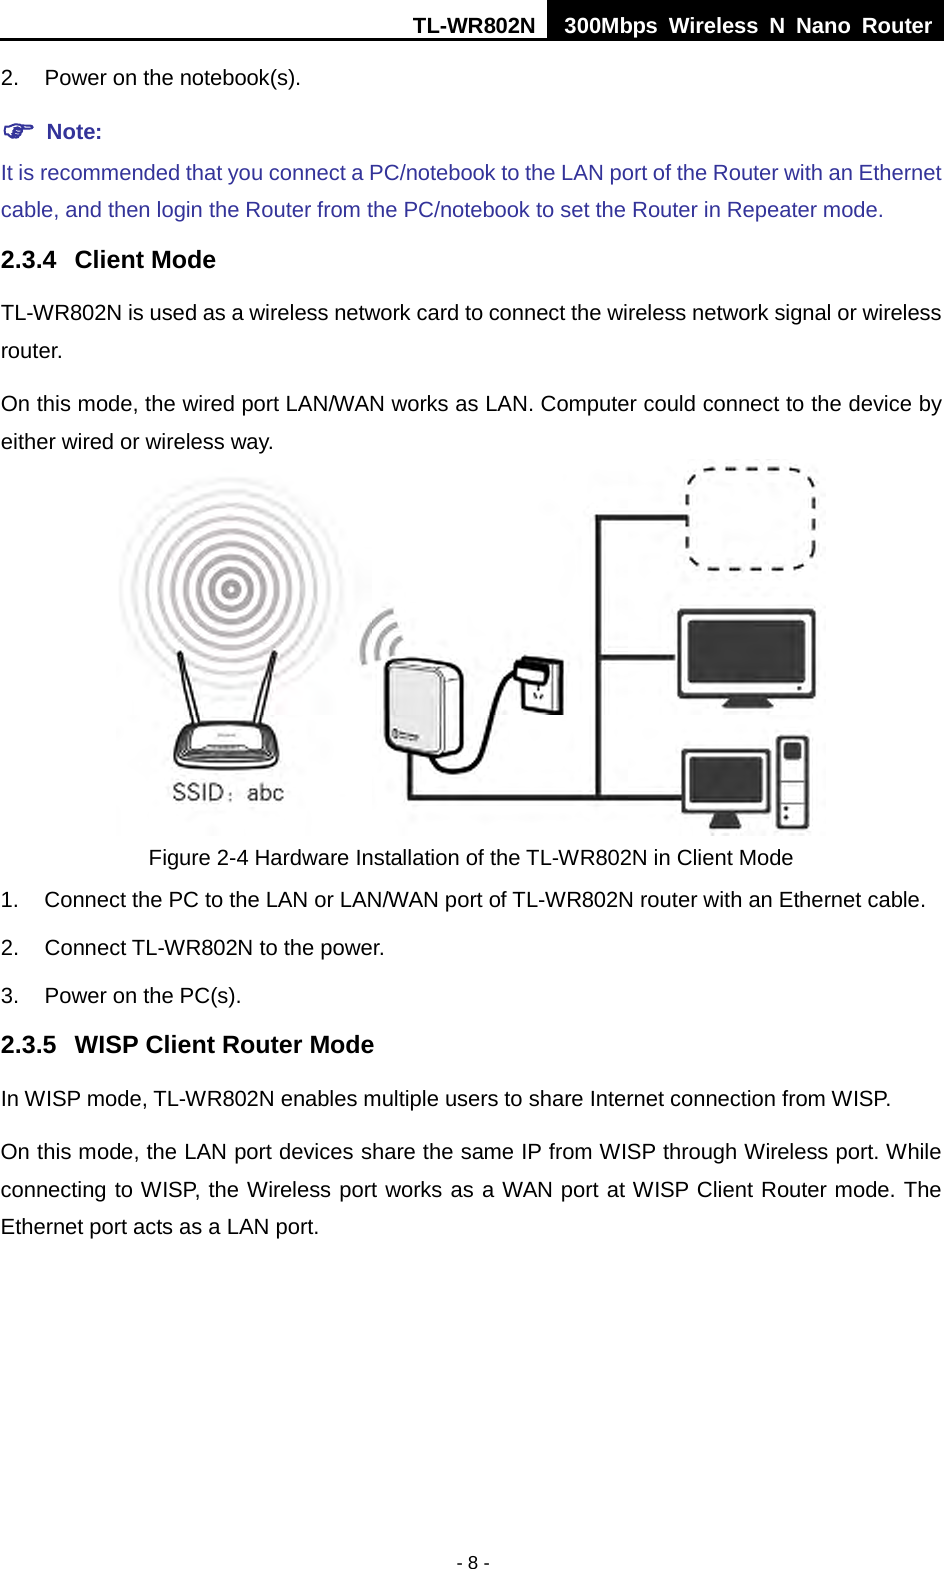 TL-WR802N  300Mbps Wireless N Nano Router  2. Power on the notebook(s).  Note: It is recommended that you connect a PC/notebook to the LAN port of the Router with an Ethernet cable, and then login the Router from the PC/notebook to set the Router in Repeater mode.   2.3.4 Client Mode TL-WR802N is used as a wireless network card to connect the wireless network signal or wireless router. On this mode, the wired port LAN/WAN works as LAN. Computer could connect to the device by either wired or wireless way.  Figure 2-4 Hardware Installation of the TL-WR802N in Client Mode 1. Connect the PC to the LAN or LAN/WAN port of TL-WR802N router with an Ethernet cable. 2. Connect TL-WR802N to the power. 3. Power on the PC(s). 2.3.5 WISP Client Router Mode In WISP mode, TL-WR802N enables multiple users to share Internet connection from WISP. On this mode, the LAN port devices share the same IP from WISP through Wireless port. While connecting to WISP, the Wireless port works as a WAN port at WISP Client Router mode. The Ethernet port acts as a LAN port. - 8 - 